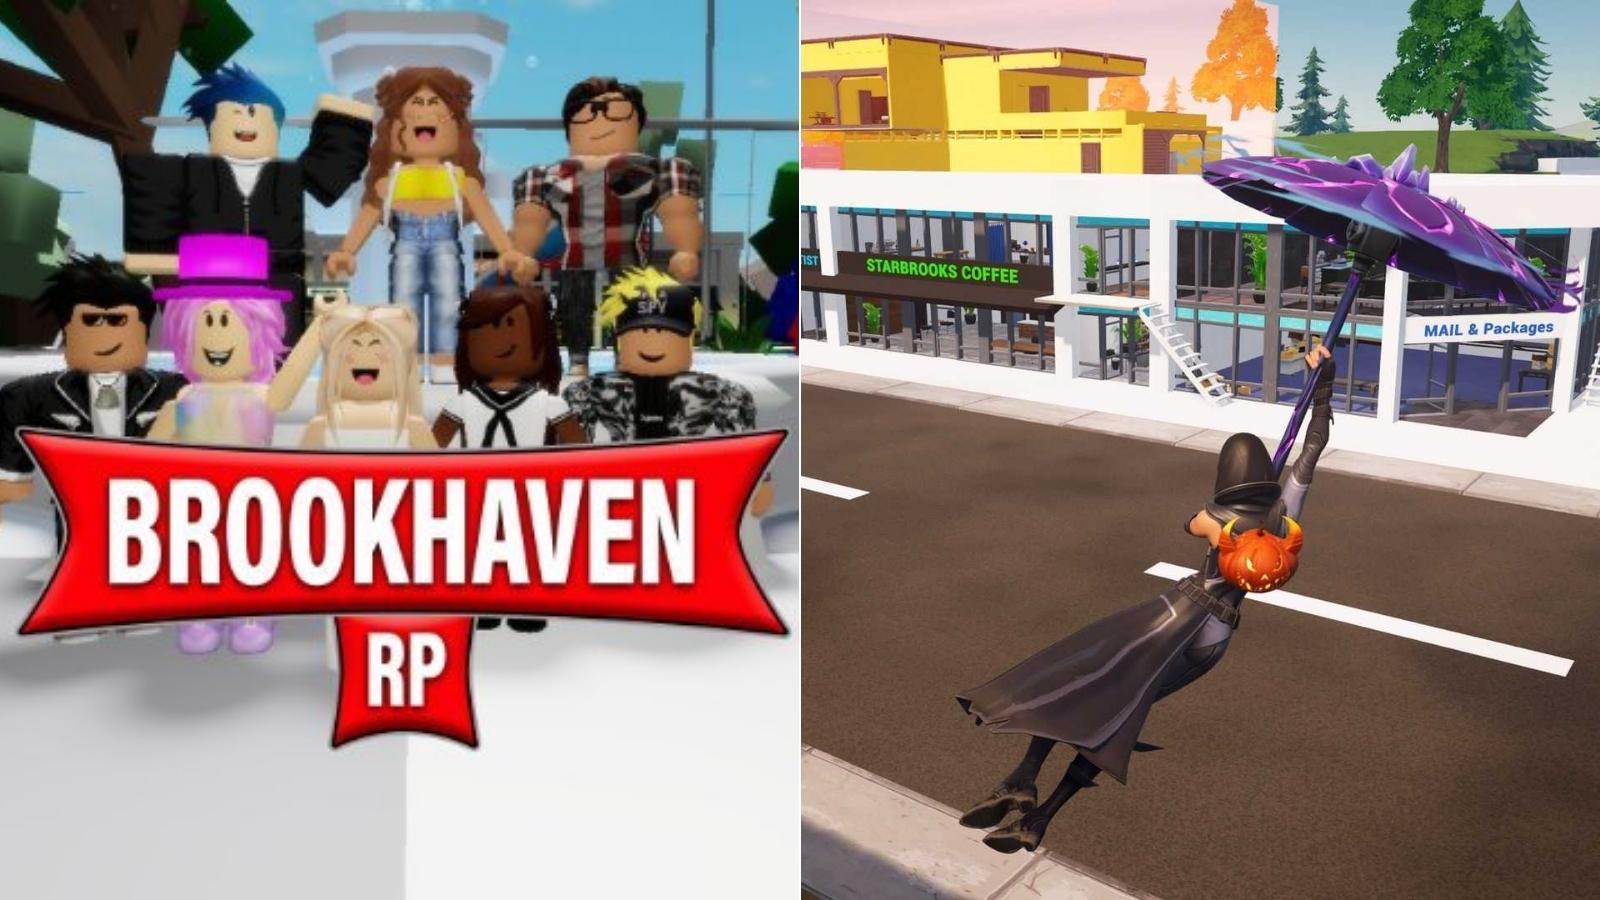 Brookhaven from Roblox remade in Fortnite Creative